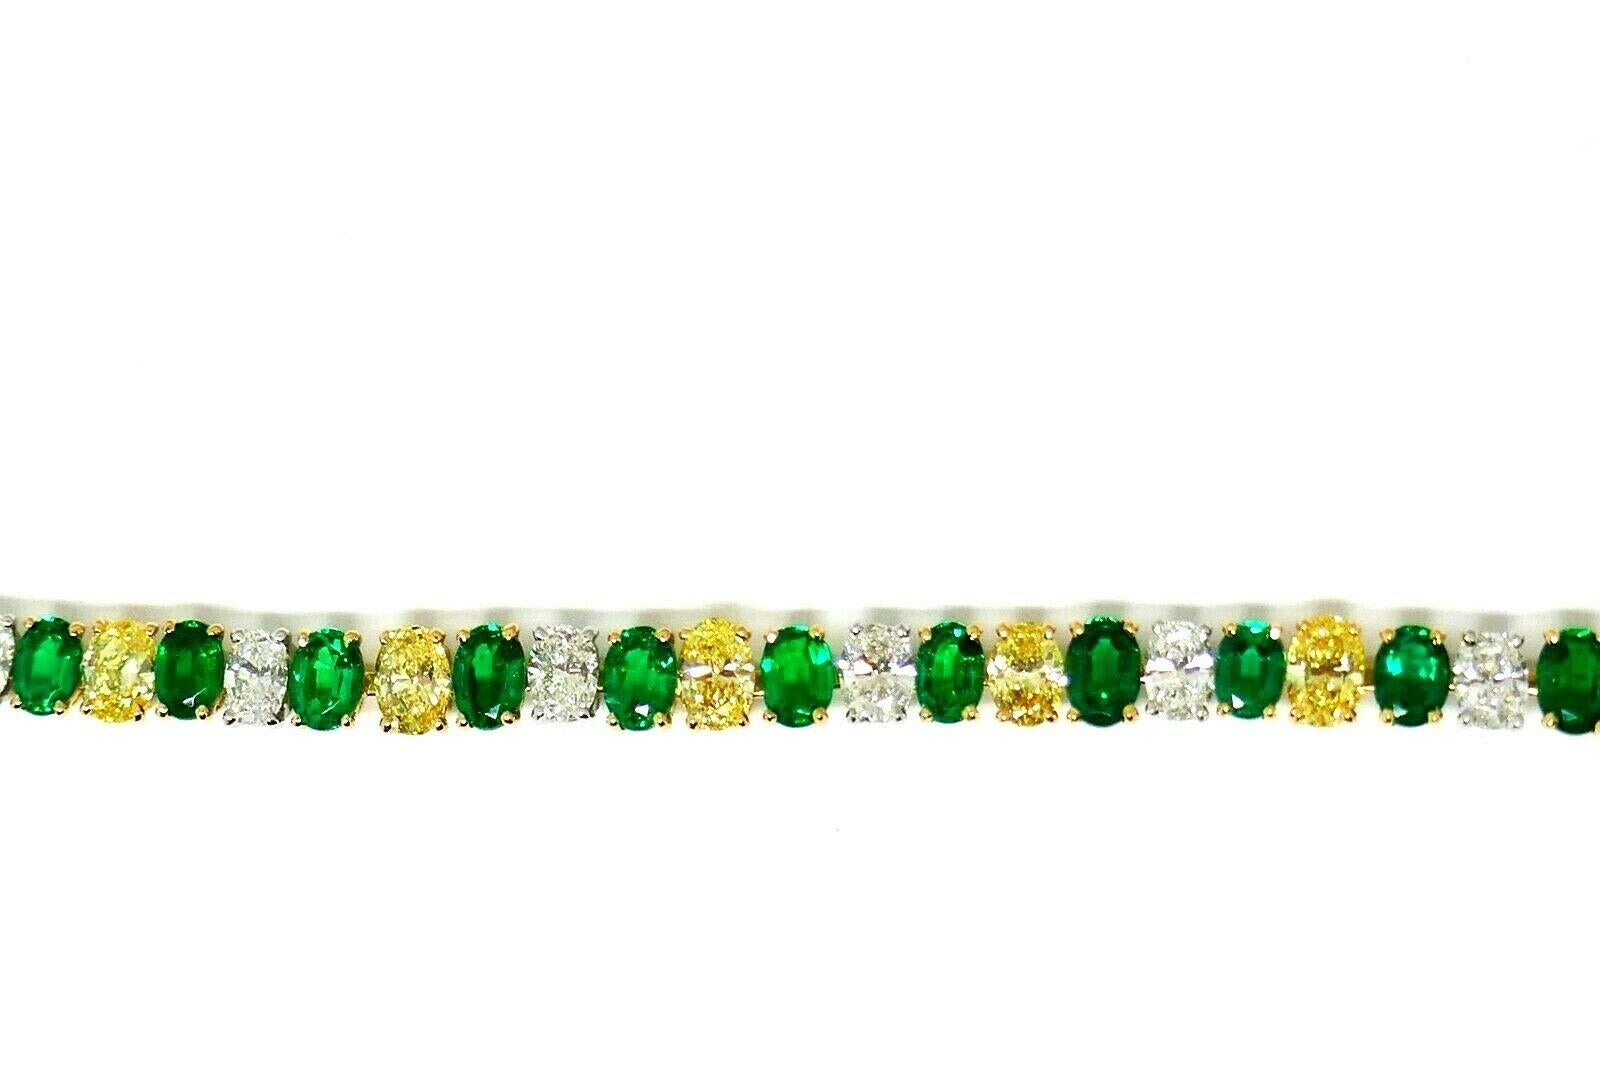 An exquisite vintage (c. 1960s) tennis bracelet by Oscar Heyman. Made of 18k yellow gold and platinum, features canary and white oval cut diamonds and oval emeralds. Comes with a certificate of authenticity. 
Stamped with Oscar Heyman maker's mark,